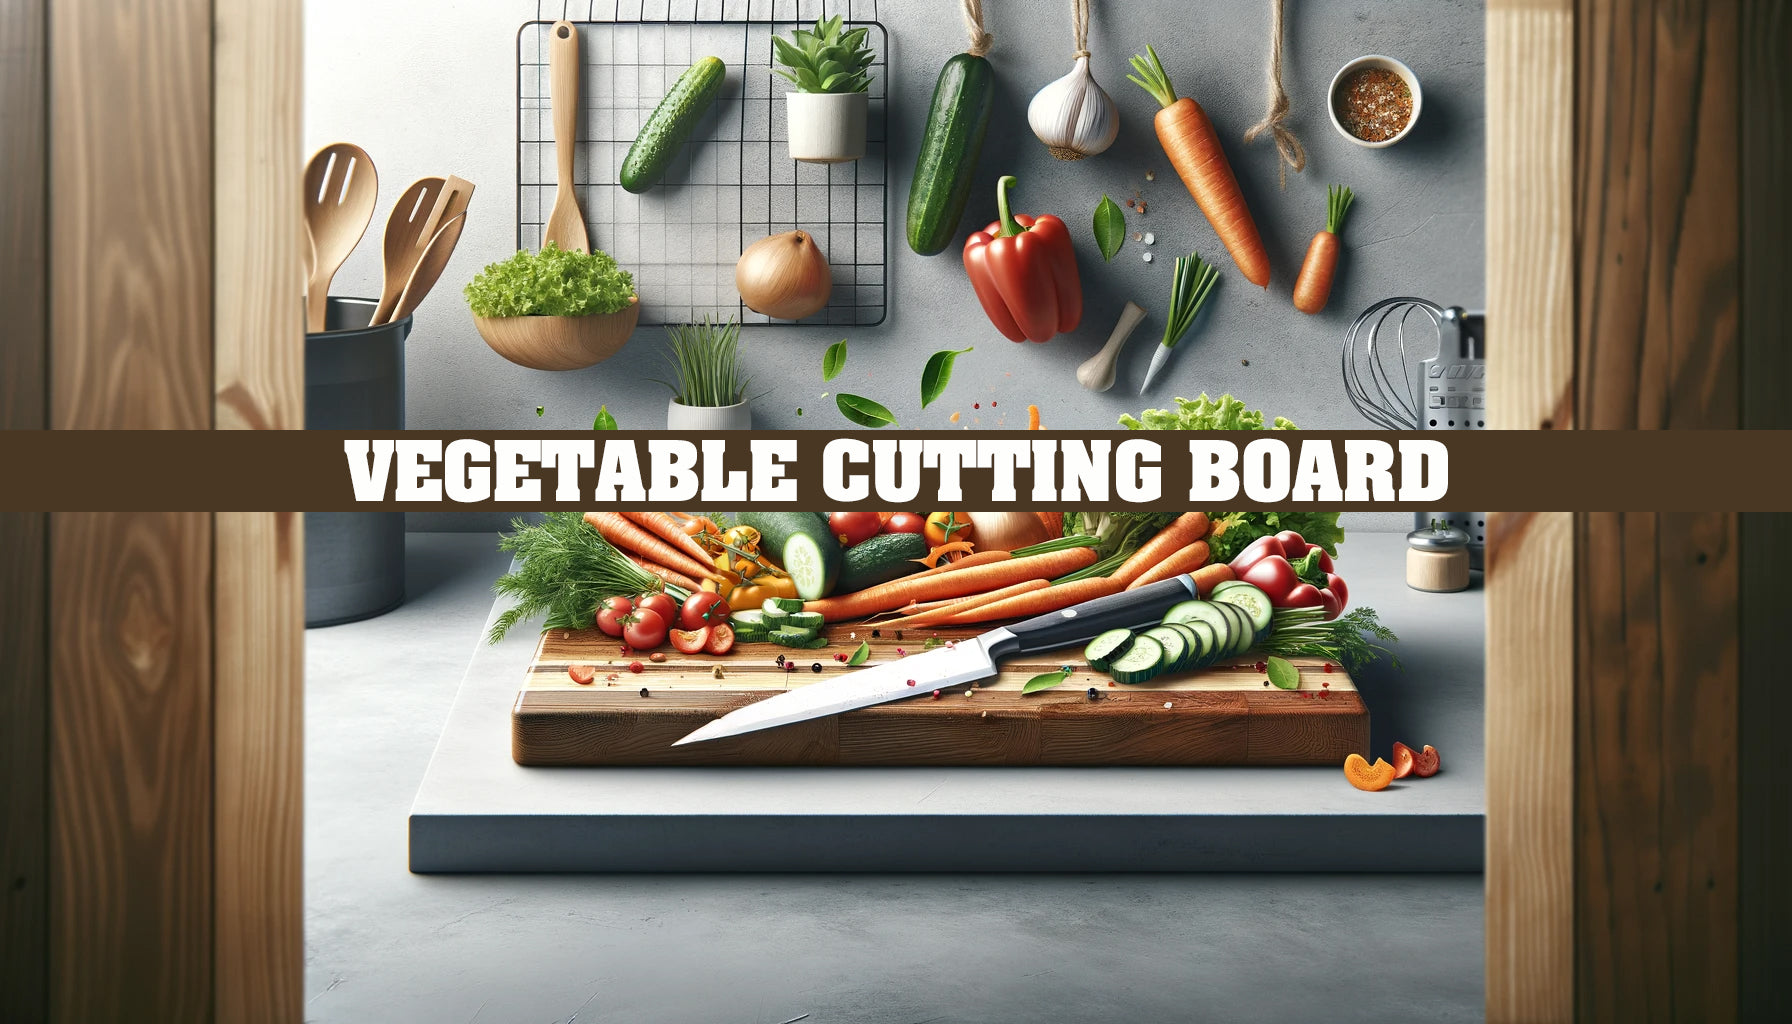 kitchen with our premium Cutting Board collection. Each board in our range is carefully selected for its durability, functionality, and aesthetic appeal. From classic wooden boards that bring a warm, natural feel to your kitchen